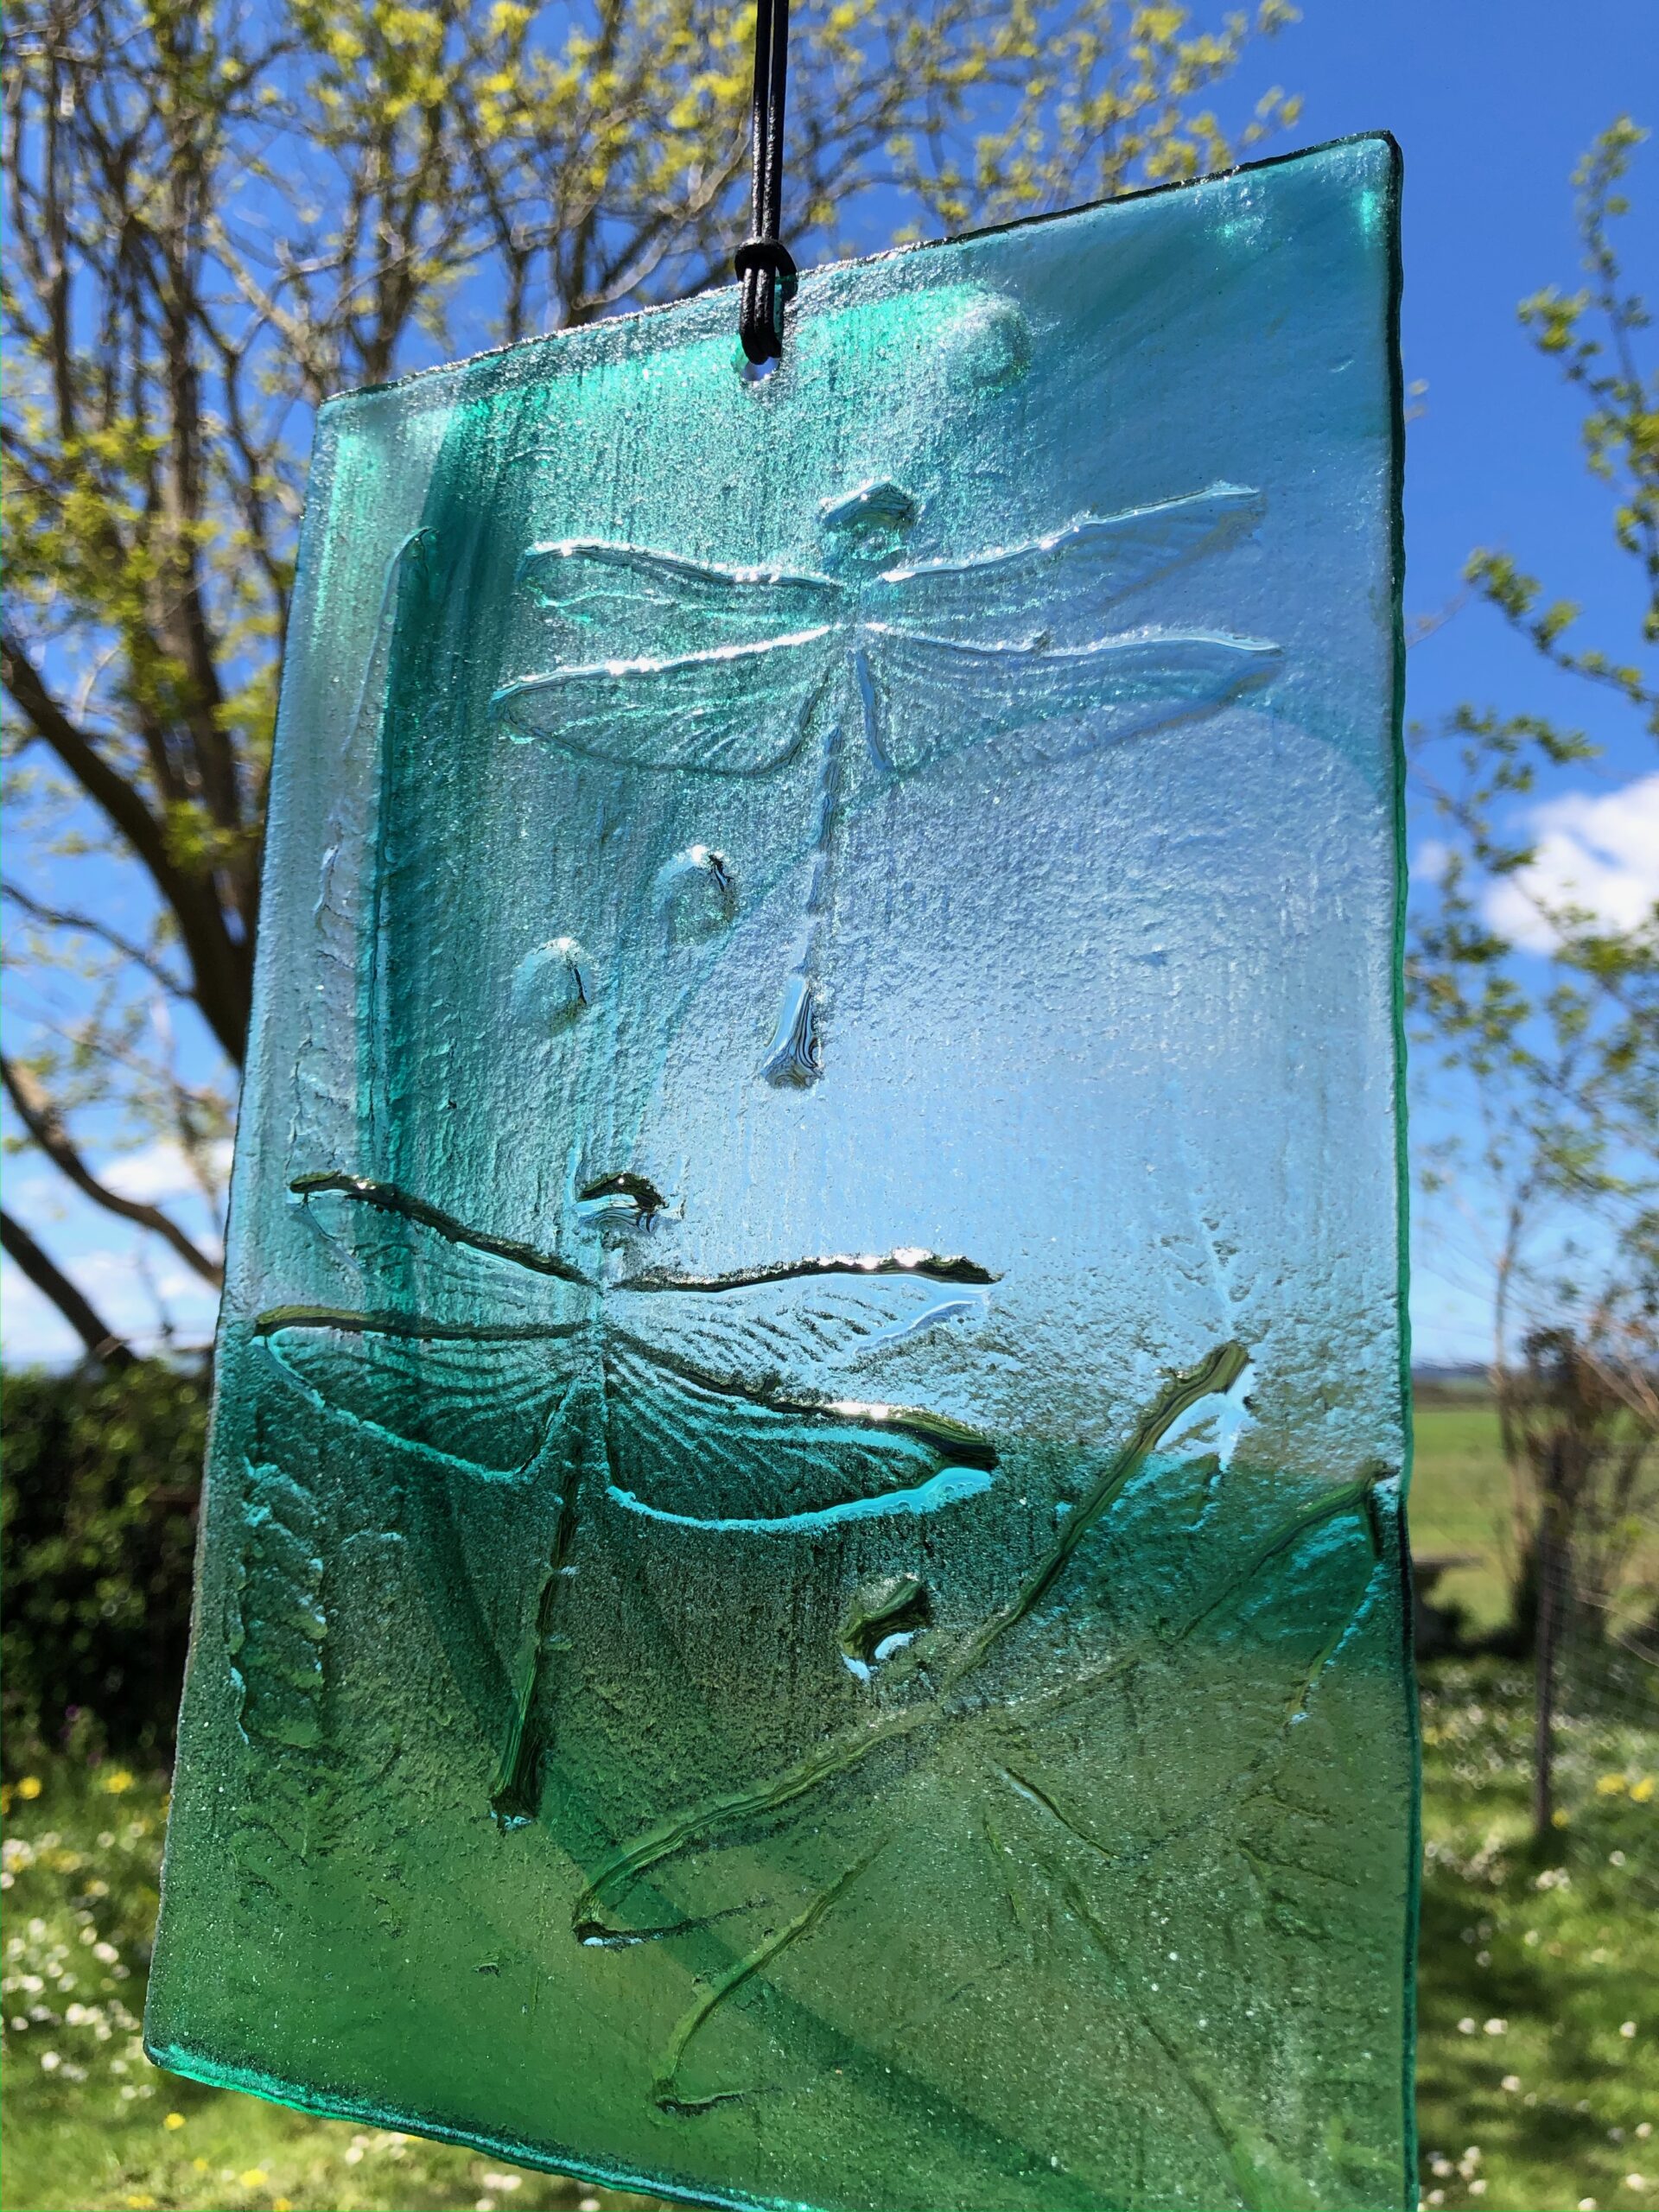 Glass Dragonfly